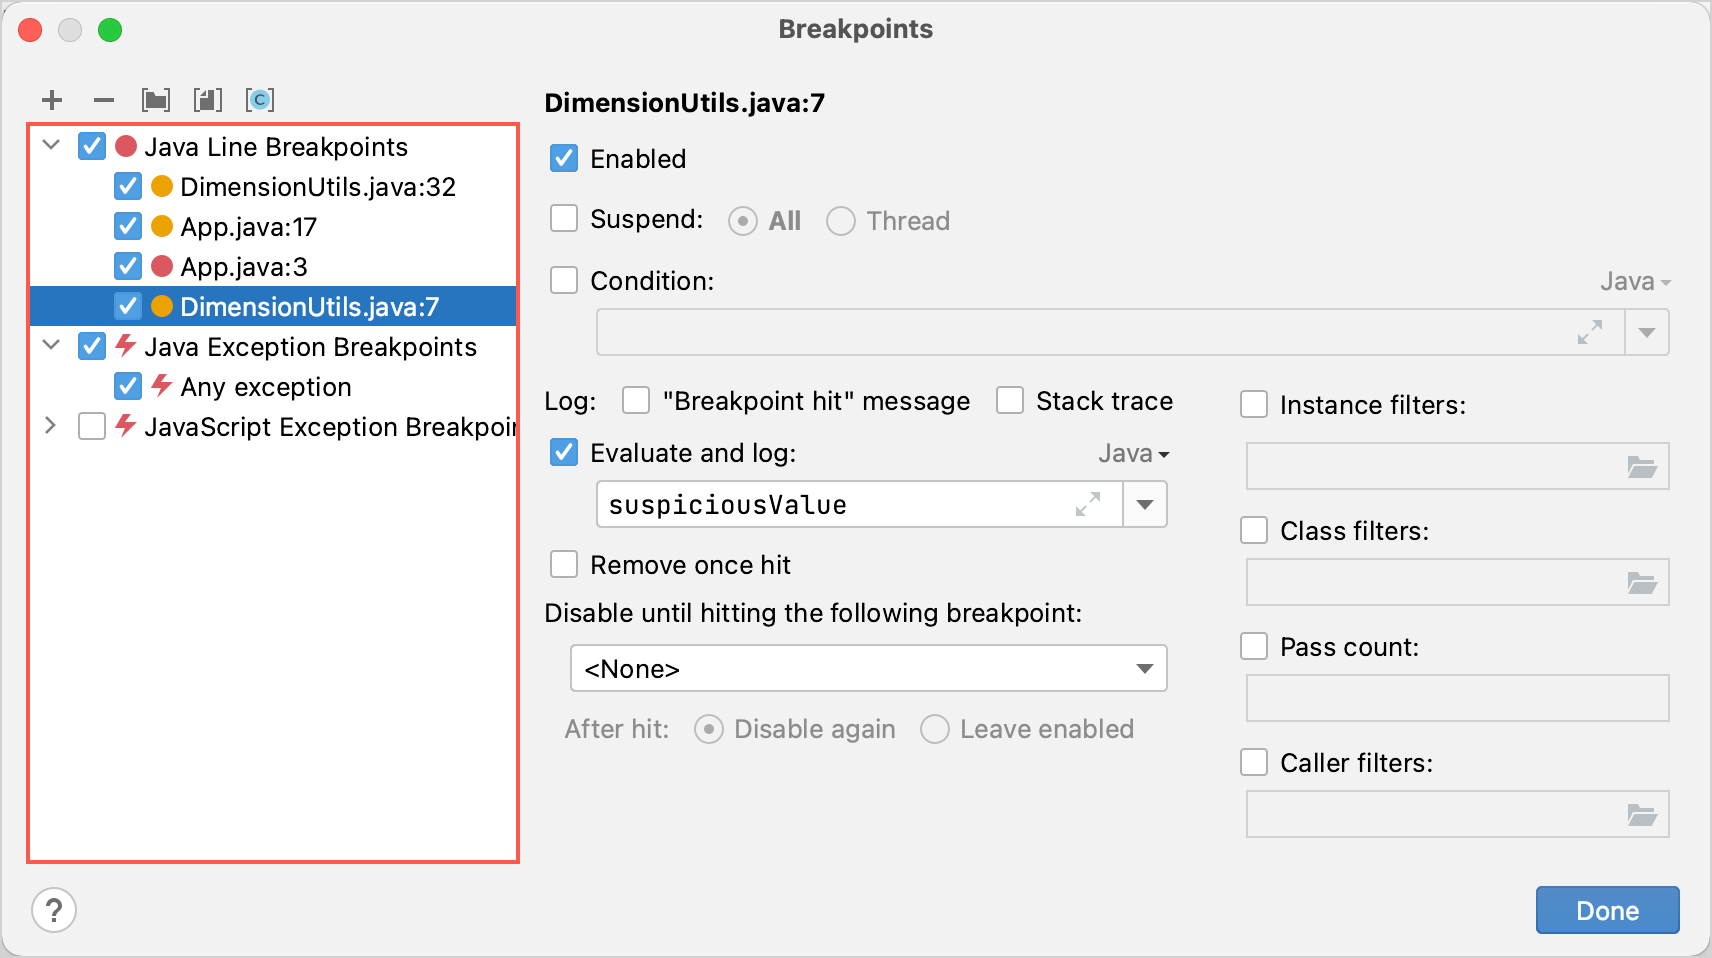 All breakpoints are displayed in the Breakpoints dialog broken down by type